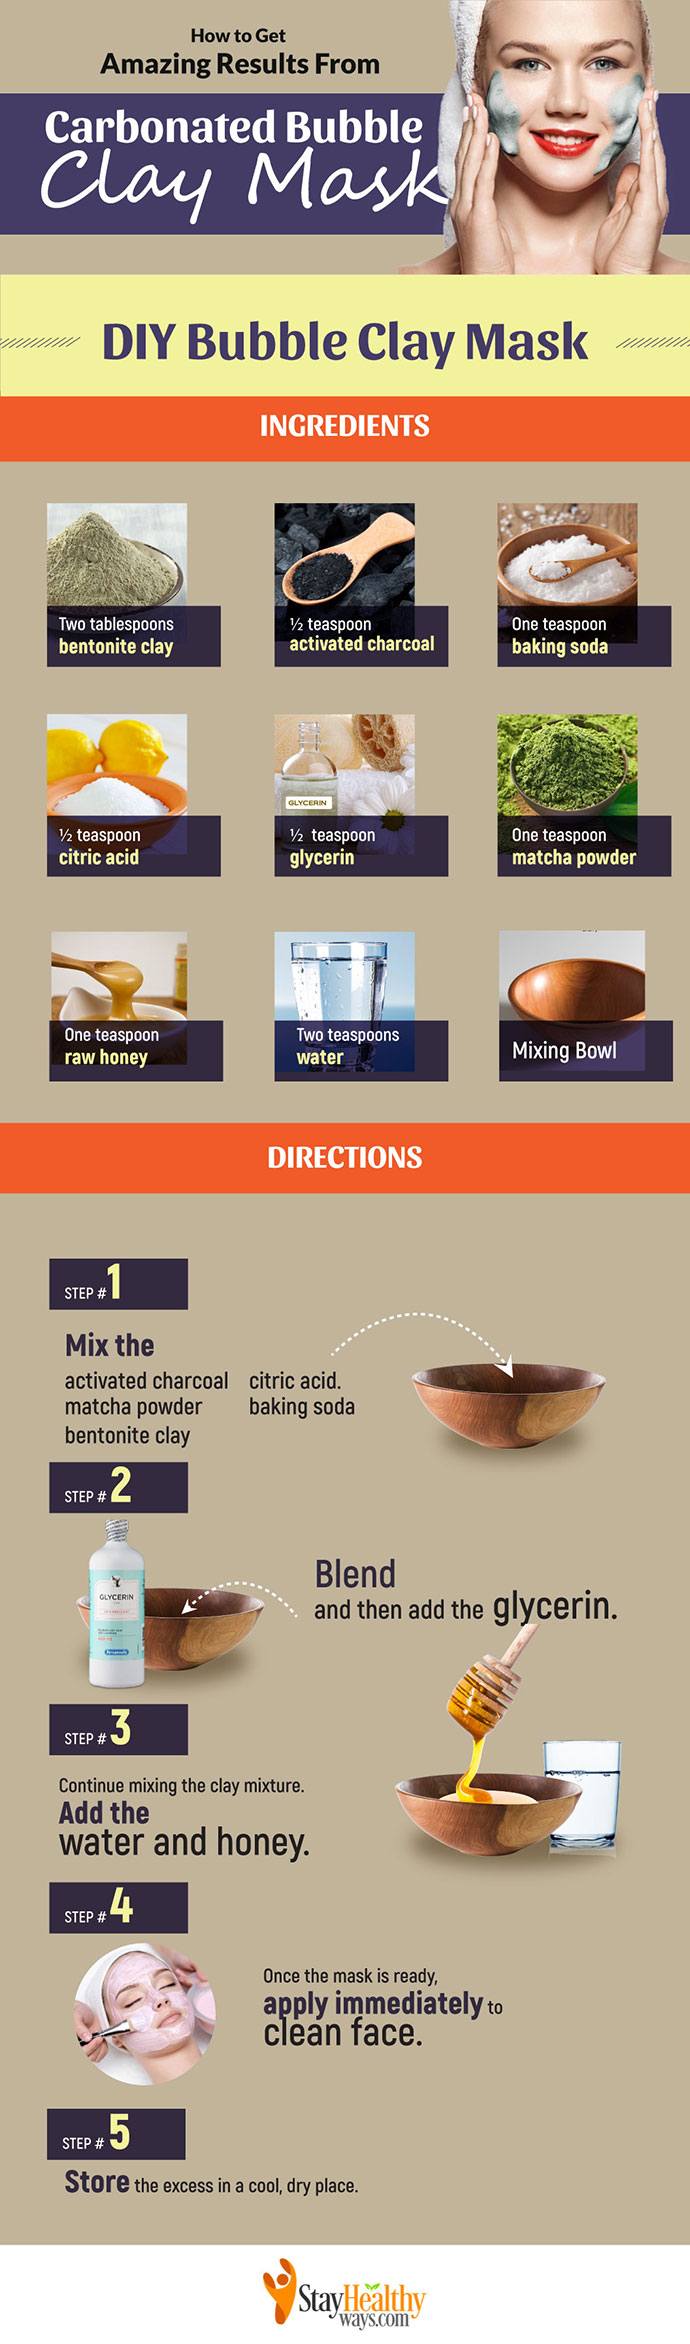 carbonated bubble clay mask infographic